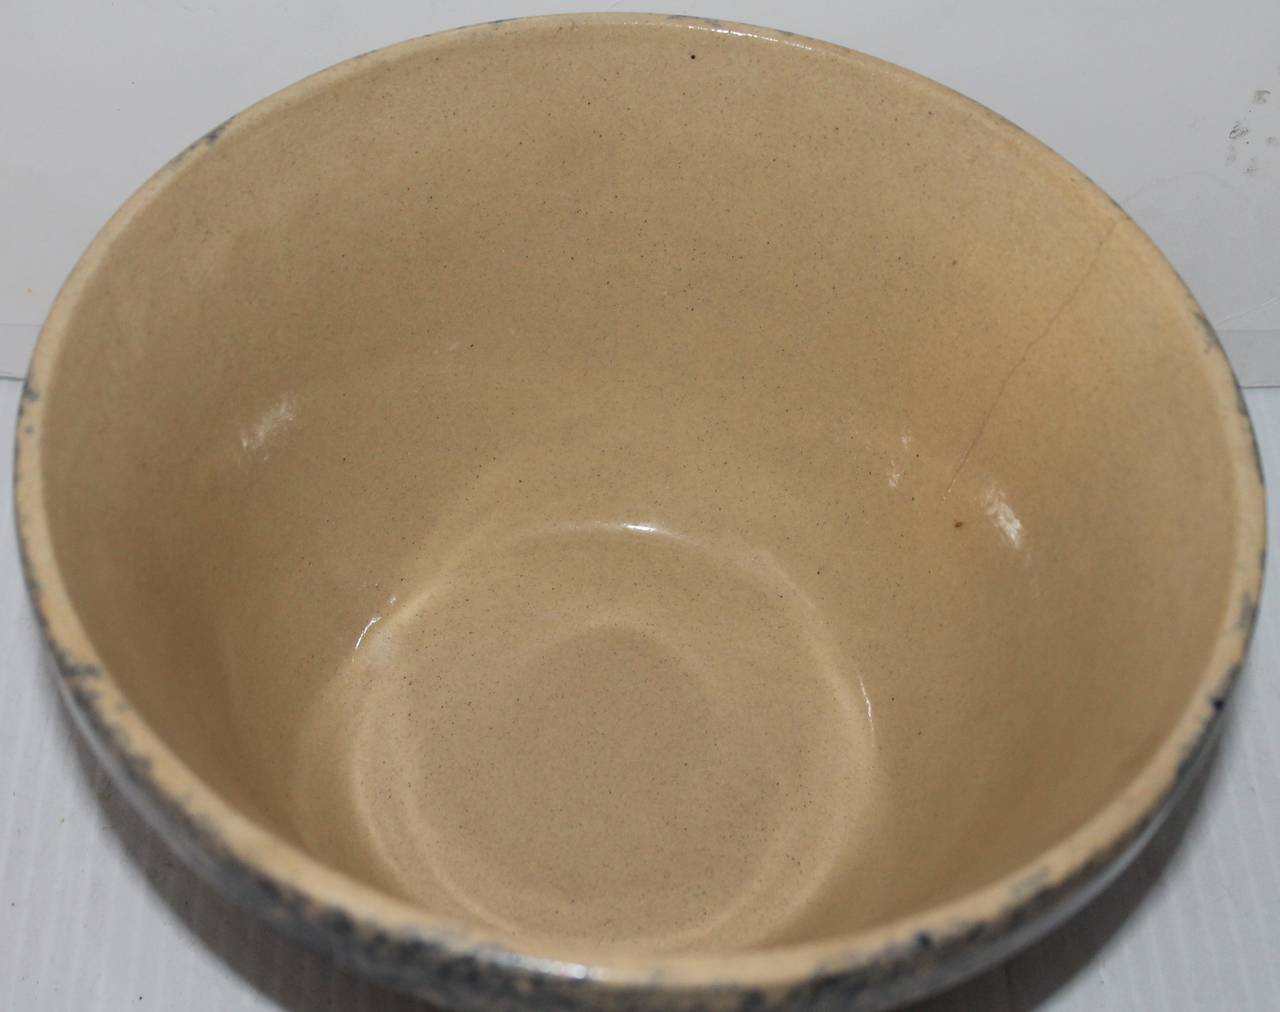 This item is one of three mixing bowls from a rare collection. This item has been well taken care of and is in excellent condition. This item has minor wear consistent with its age.